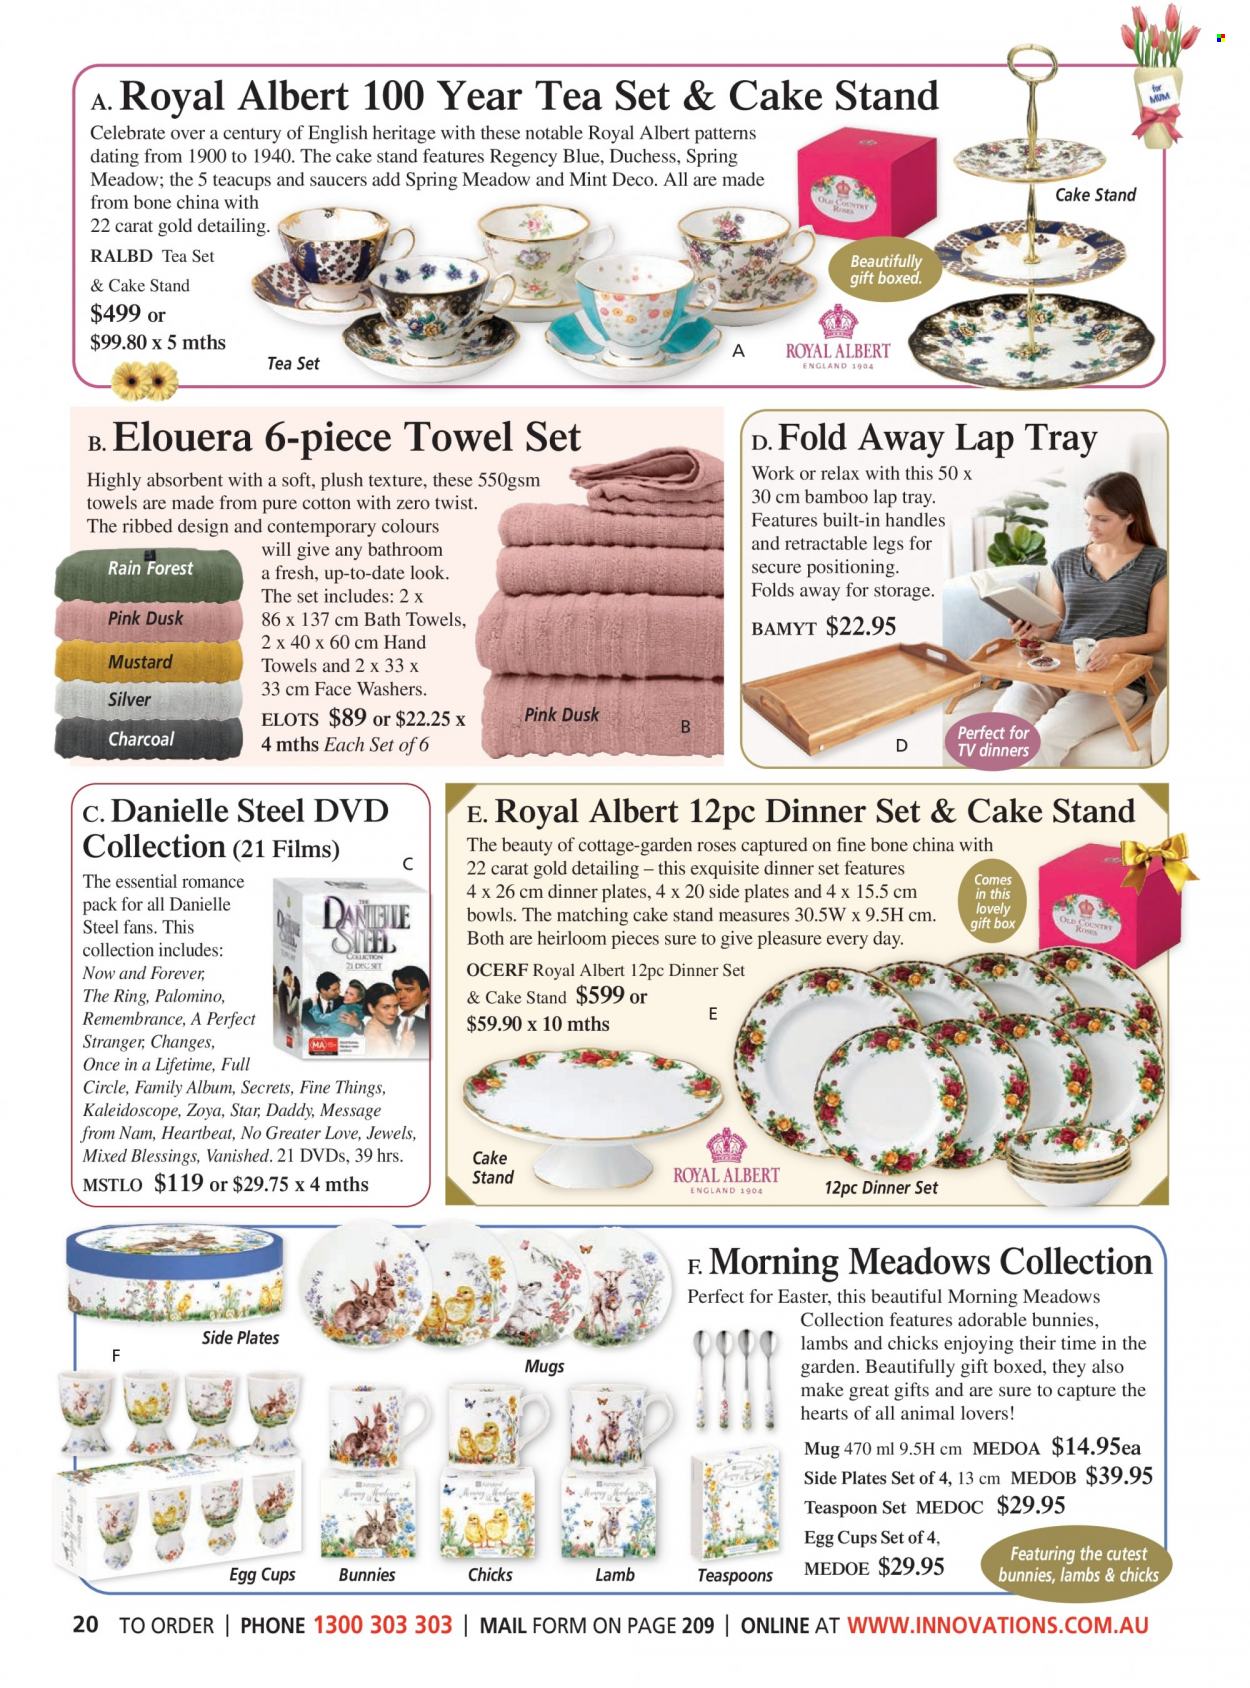 thumbnail - Innovations Catalogue - Sales products - cake stand, dinnerware set, mug, plate, cup, teaspoon, dinner plate, gift box, DVD, bath towel, towel. Page 20.